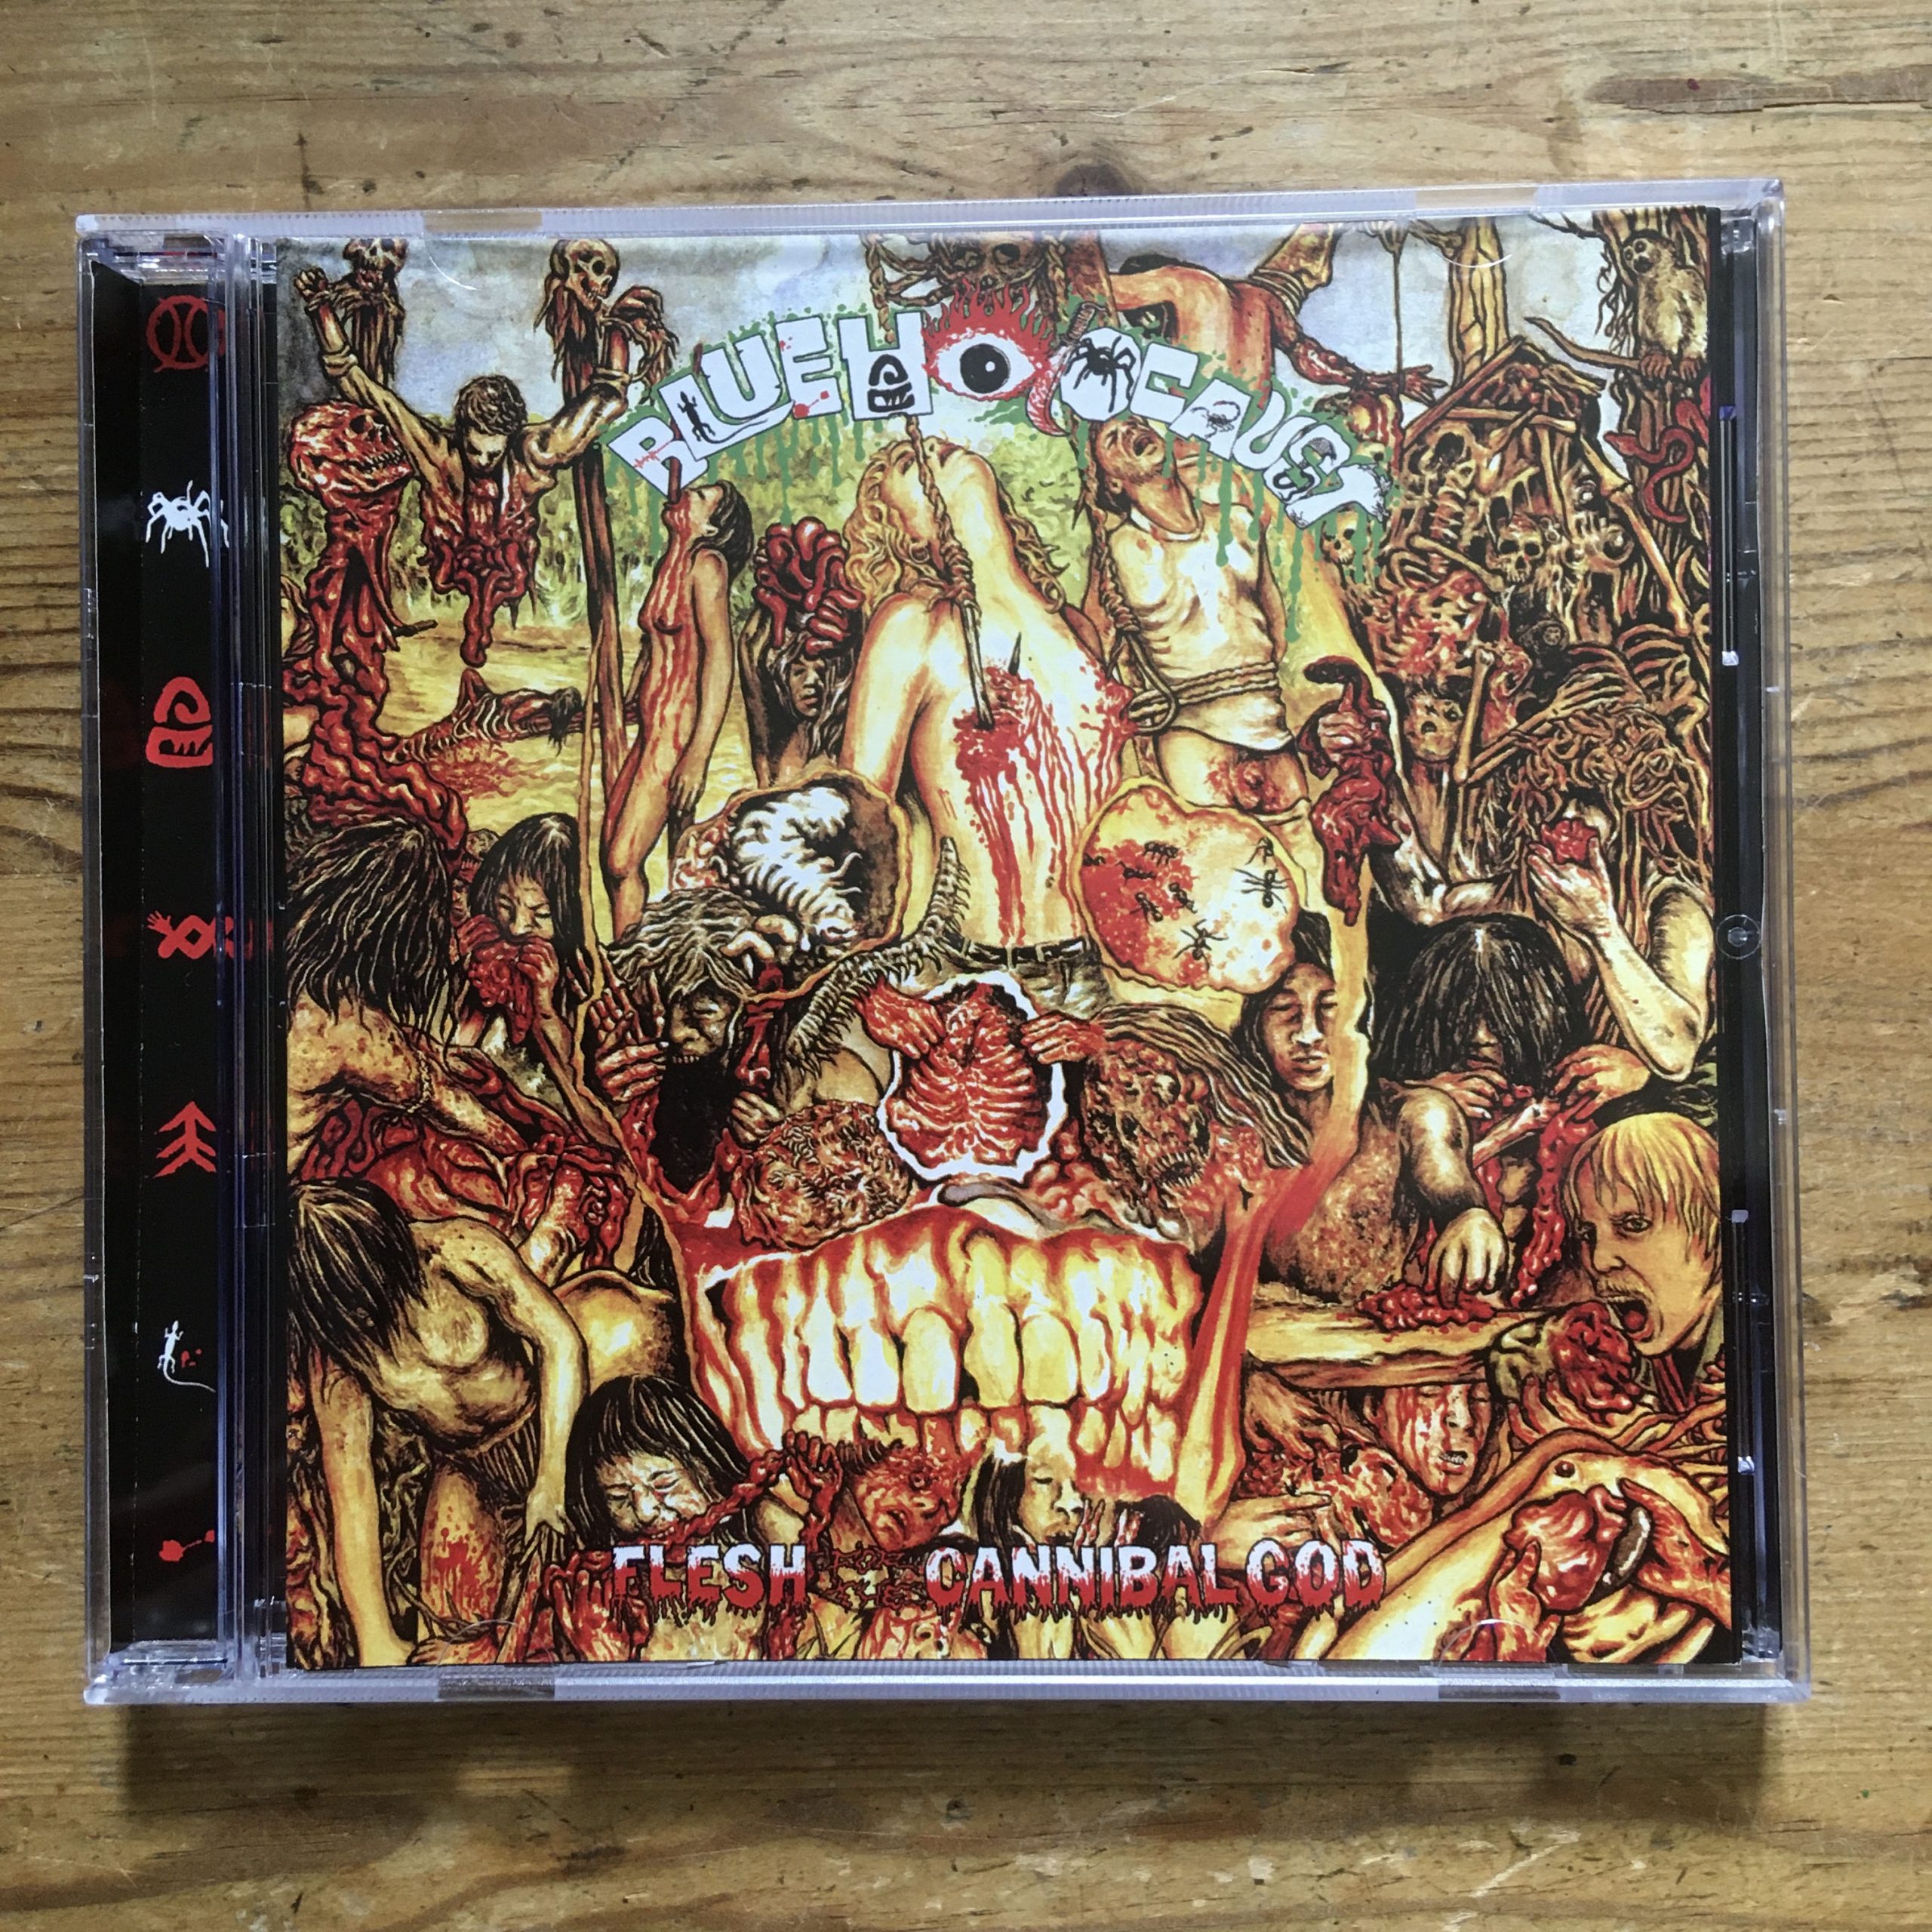 Photo of the Blue Holocaust - "Flesh for the Cannibal God" CD